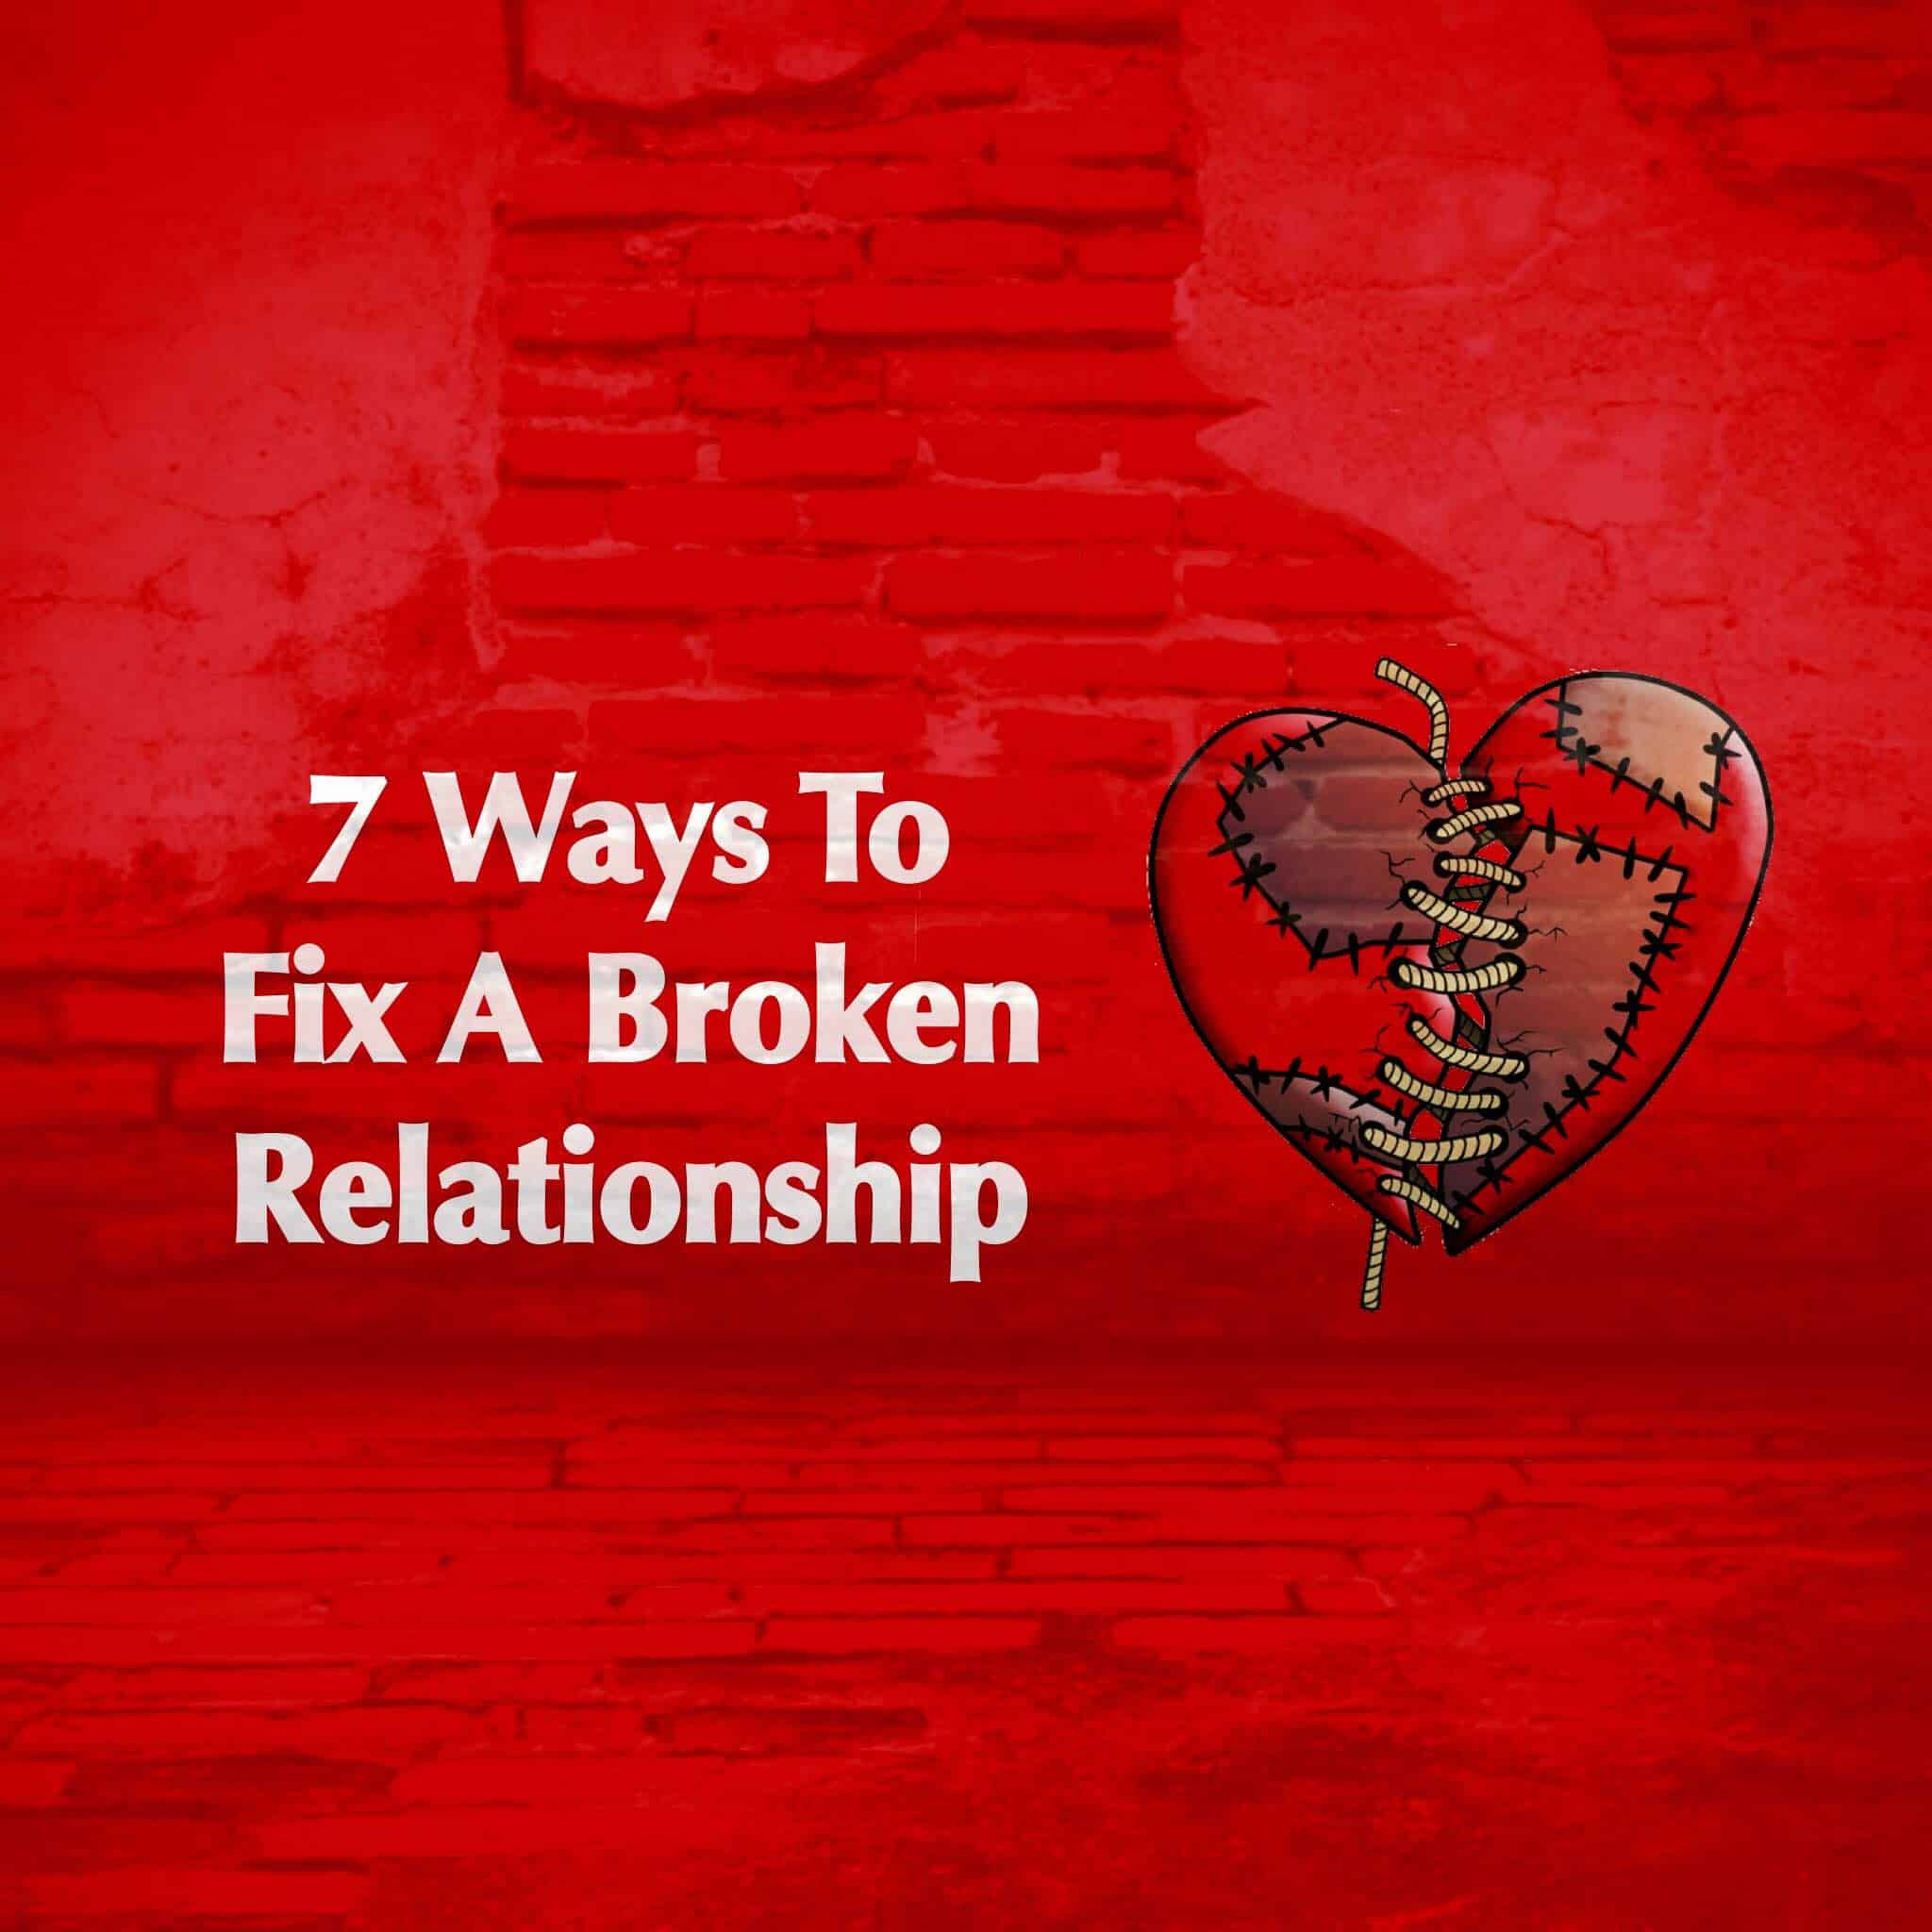 How To Fix A Broken Relationship Quotes
 7 Ways To Fix A Broken Relationship Power Positivity